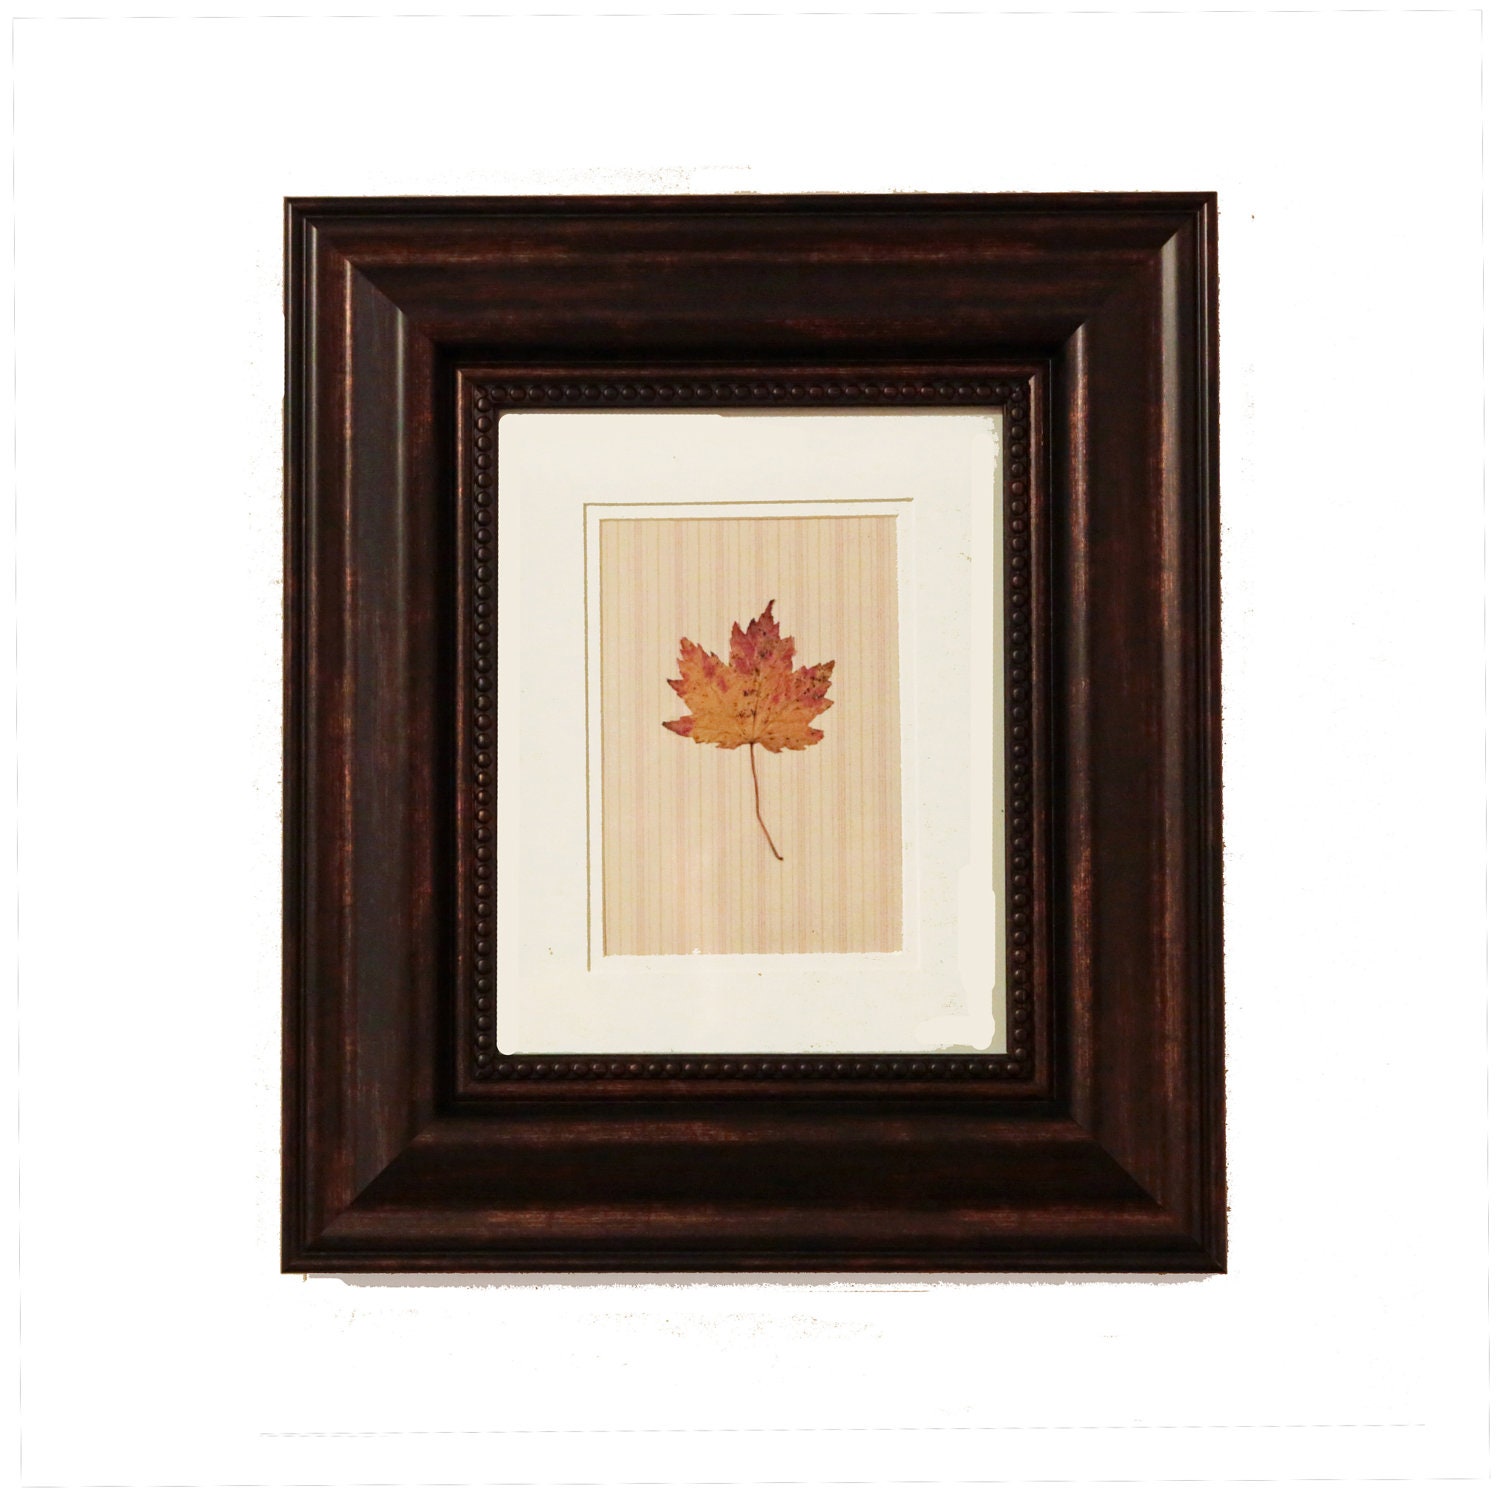 Framed Fall Leaf Pressed Leaves  Autumn Wall Decor Thanksgiving Decor - FoundationCreations